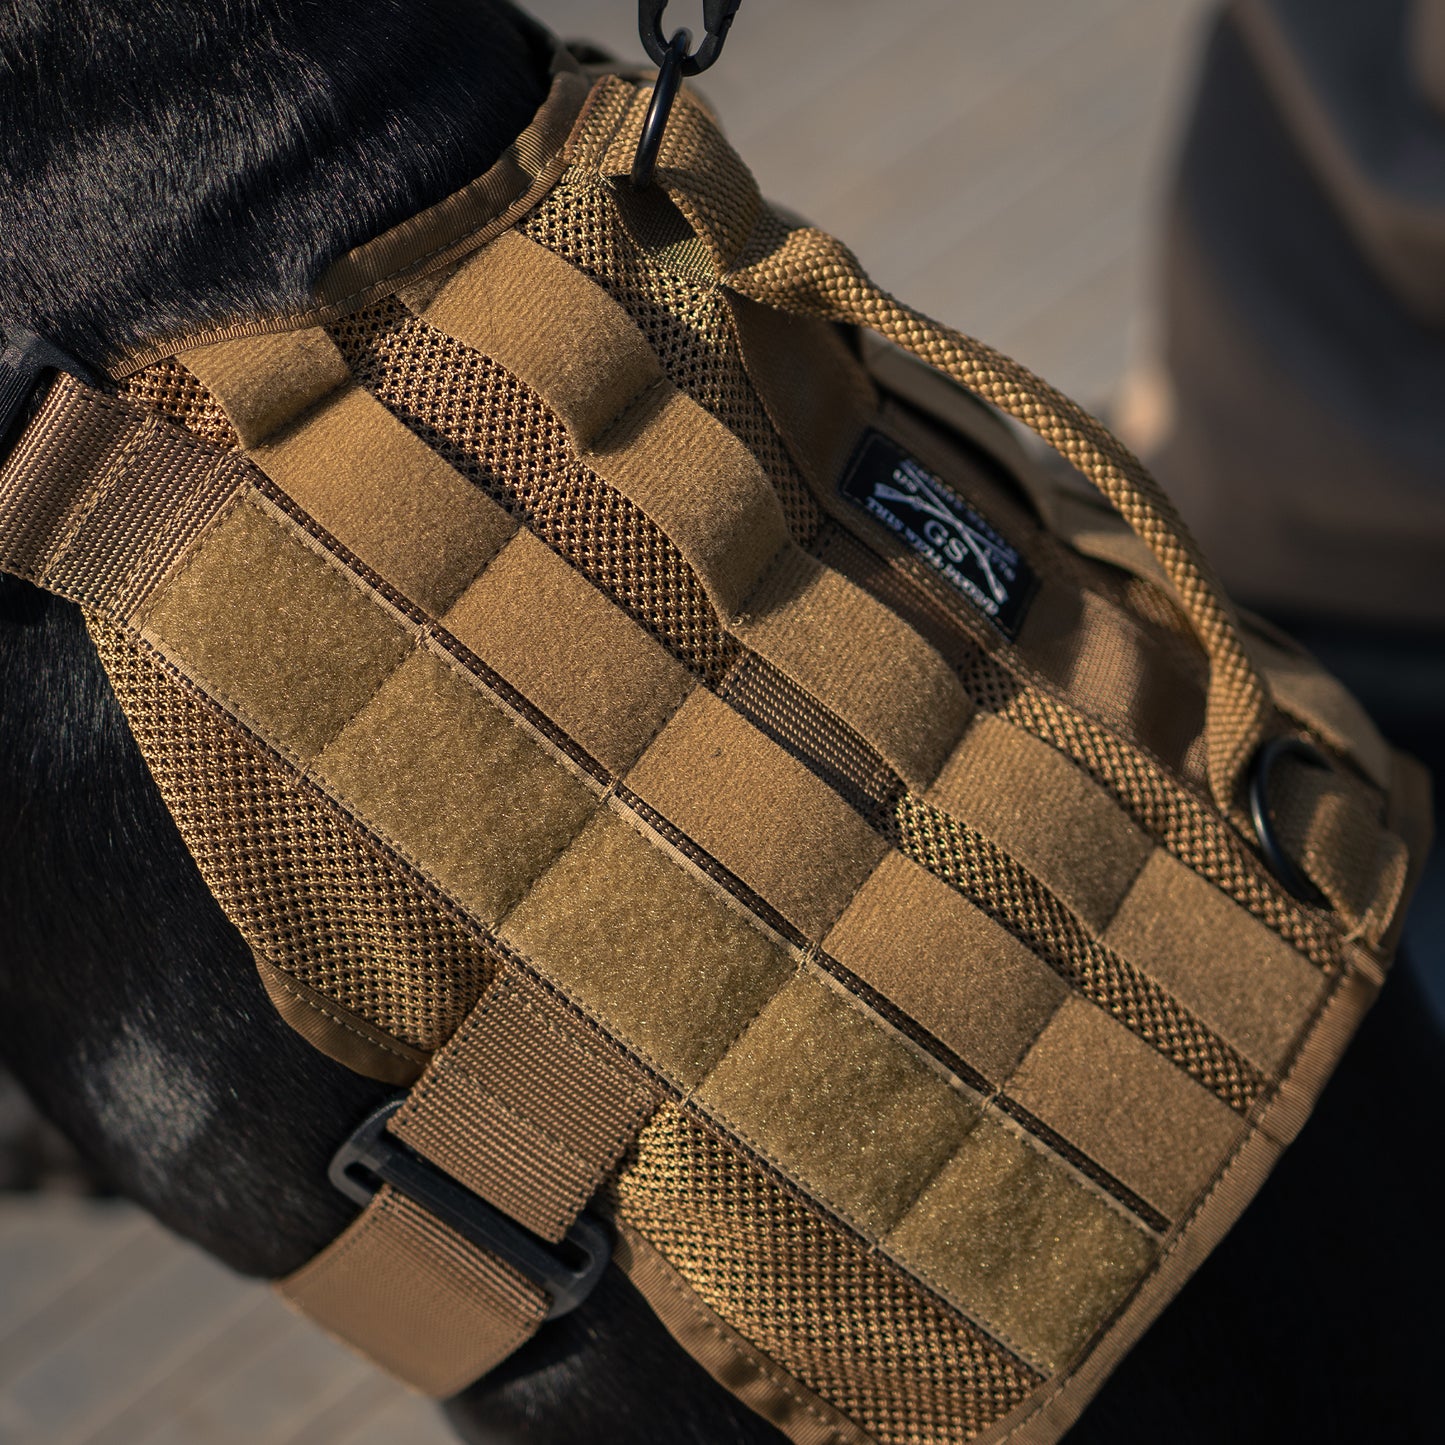 Tactical Dog Vest in Coyote | Grunt Style